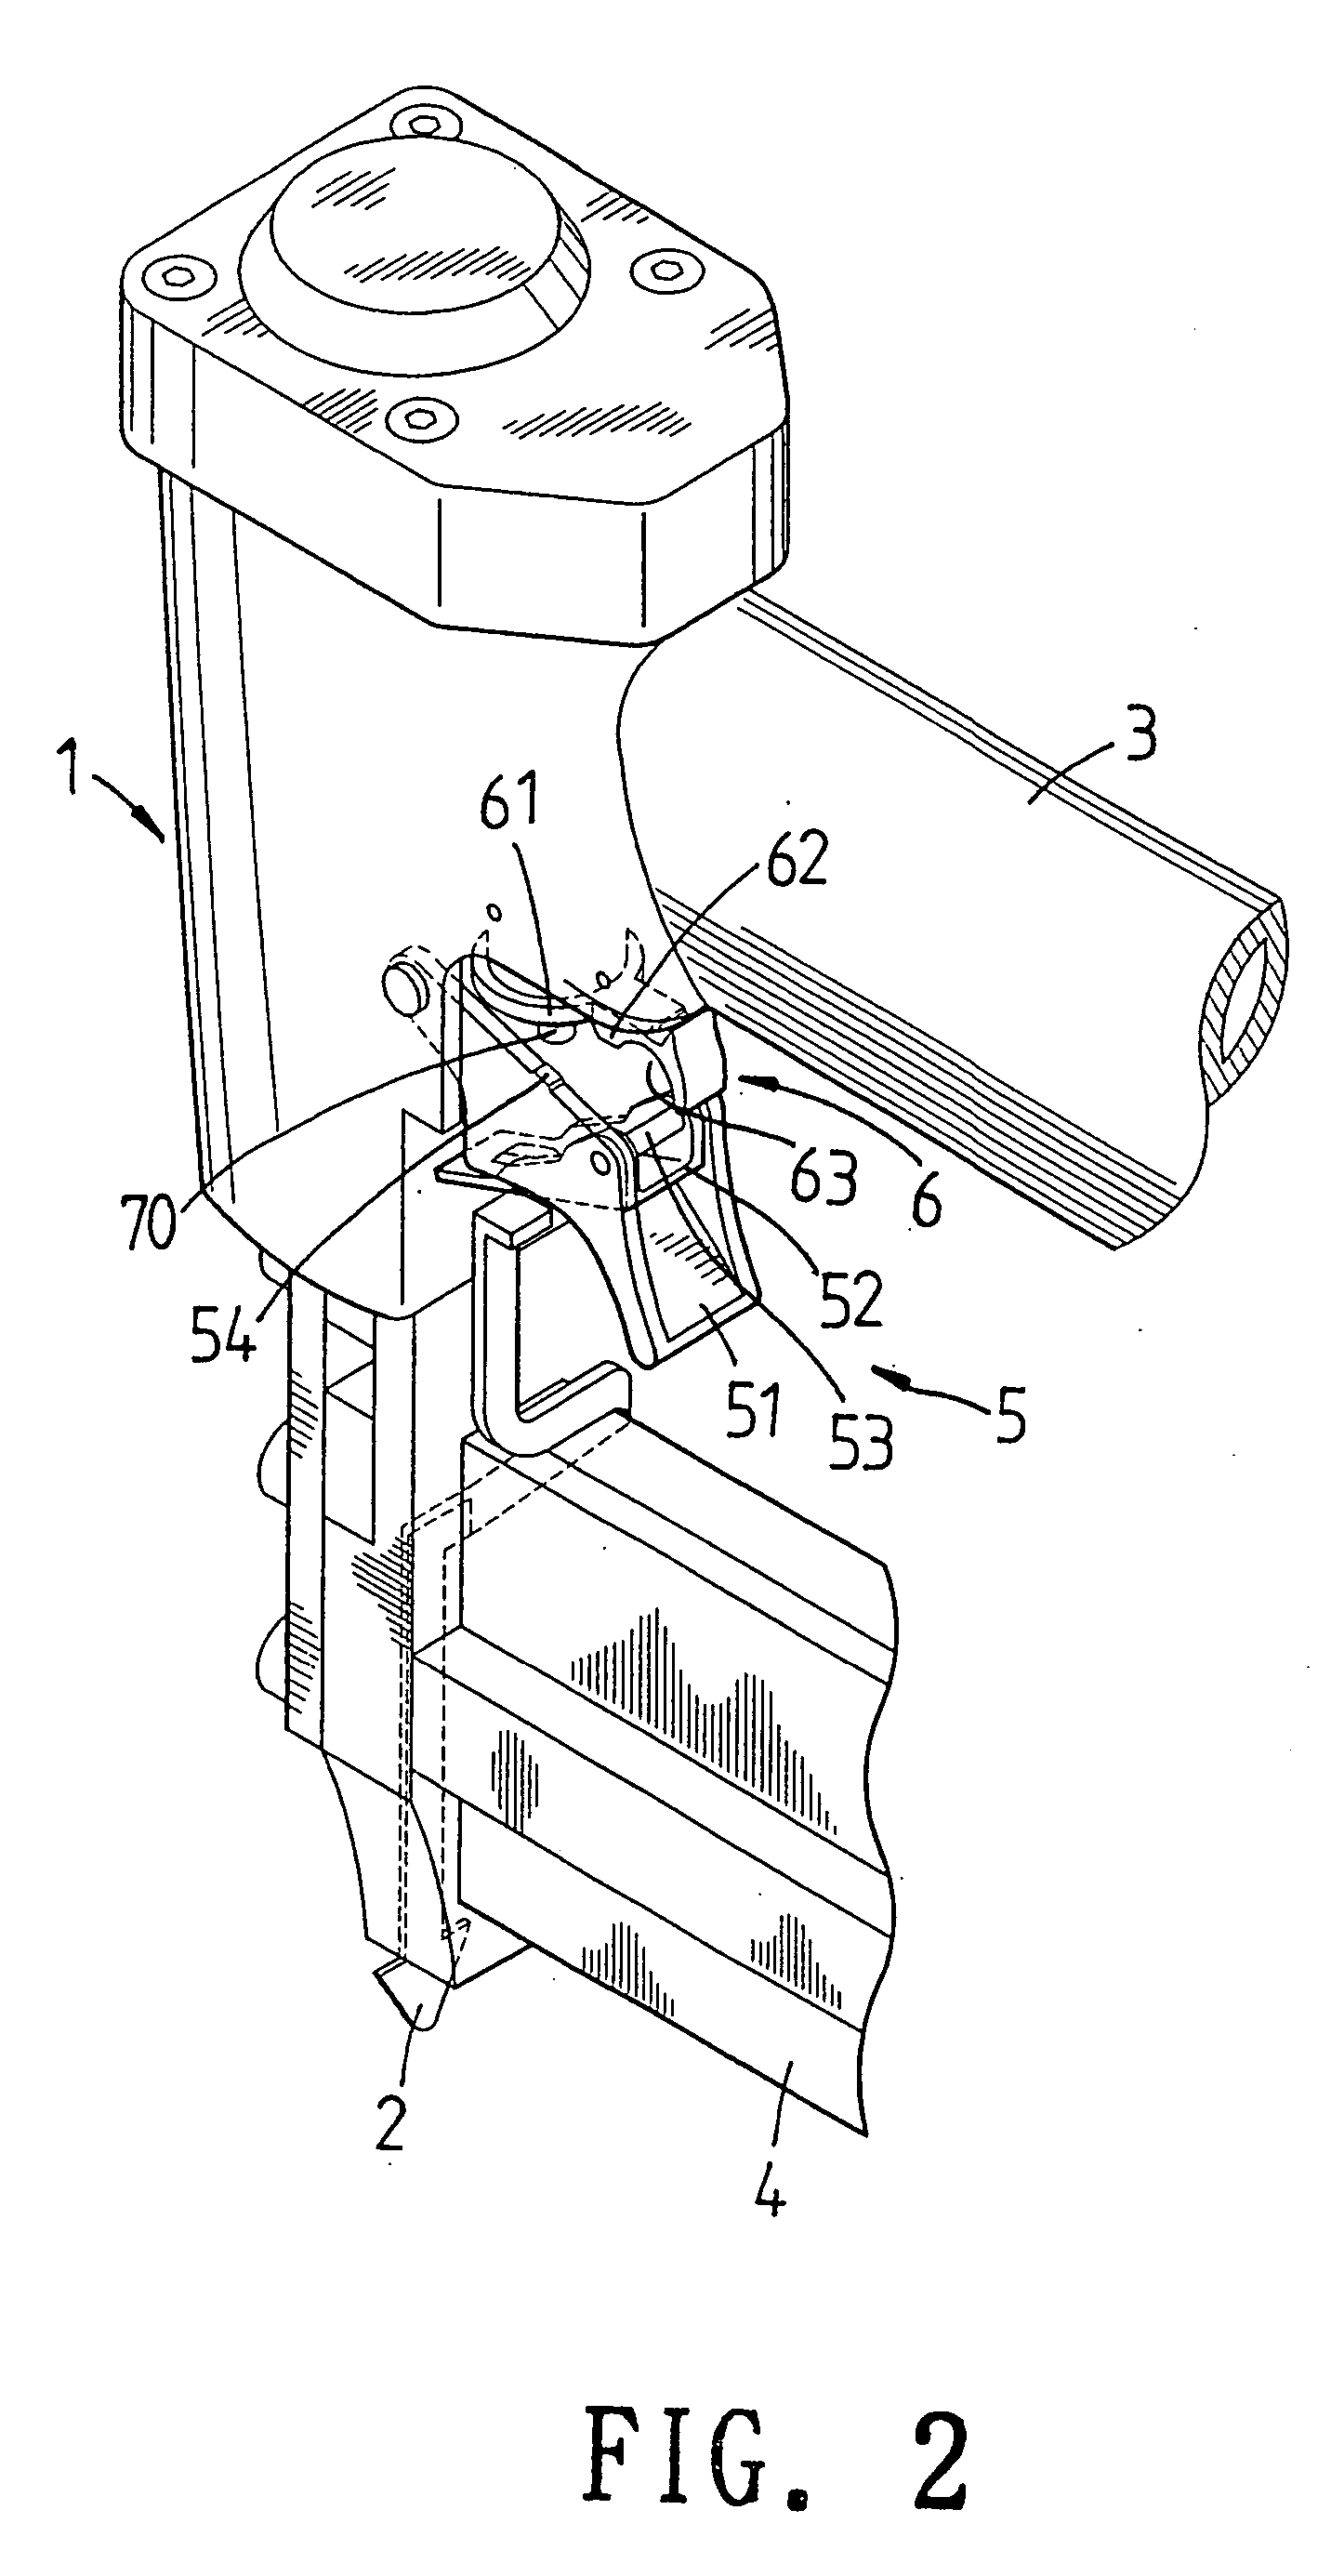 Trigger switch structure of nail driver